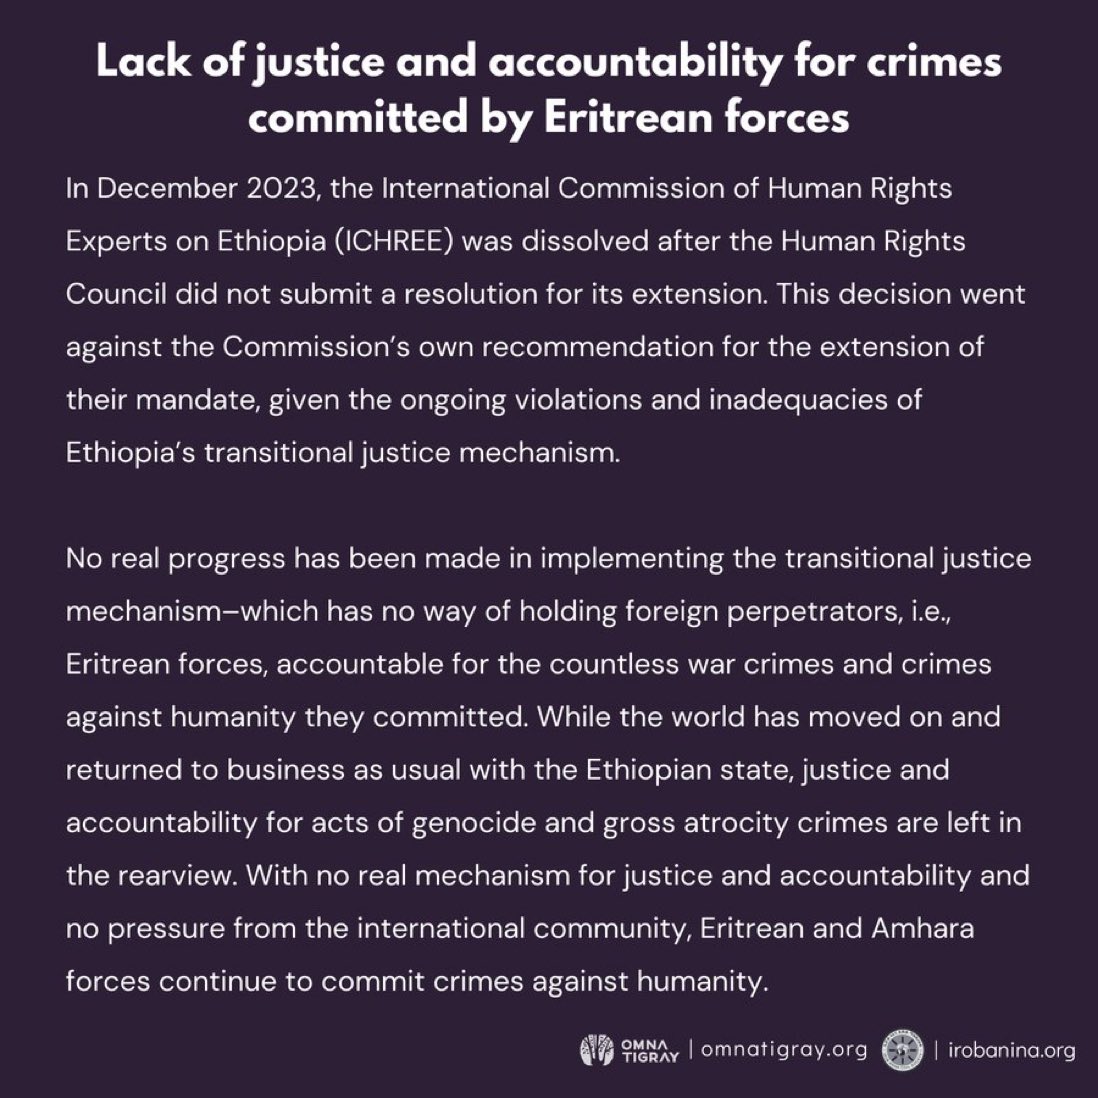 In Dec 2023, @UN_HRC's #ICHREE was dissolved. Since then, significant progress hasn't been made in implementing🇪🇹's transitional justice mechanism–which has no way of holding 🇪🇷 forces accountable for countless war crimes and crimes against humanity. #Justice4Tigray @UN_HRC @WFP